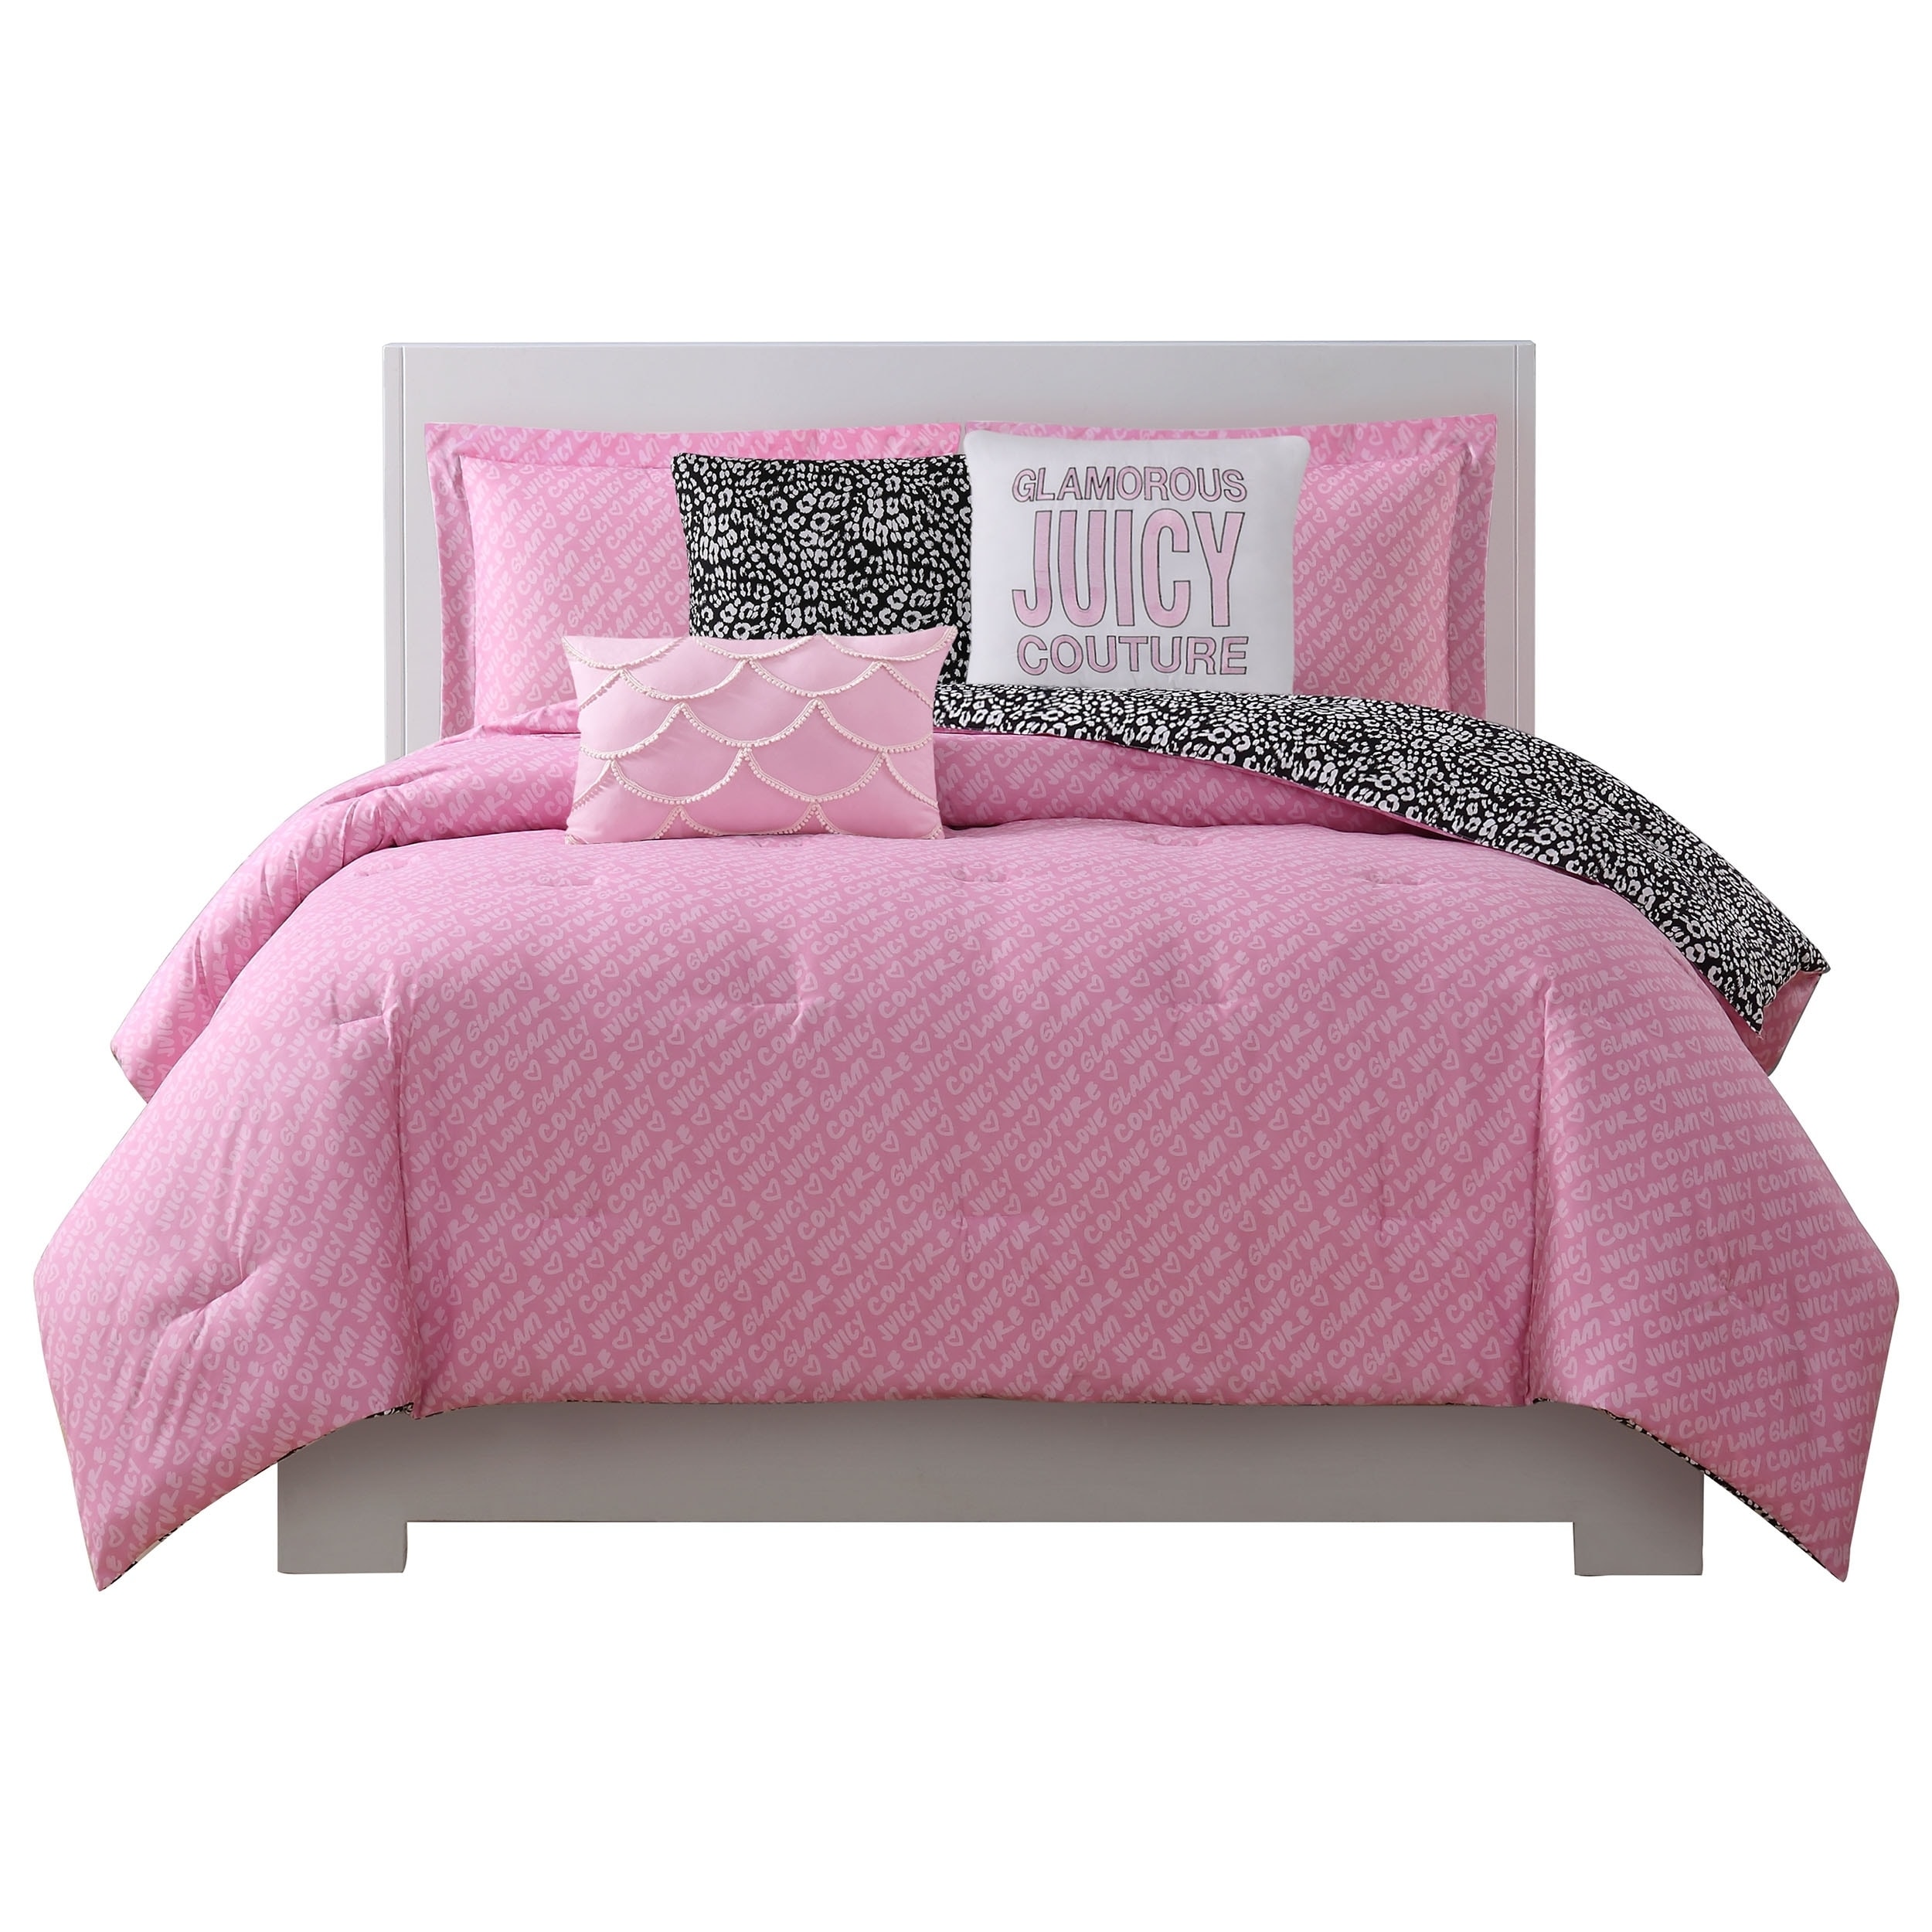 Fabulous and Fru Fru: Juicy Couture Inspired Room  Room inspiration, Juicy  couture baby, Juicy couture